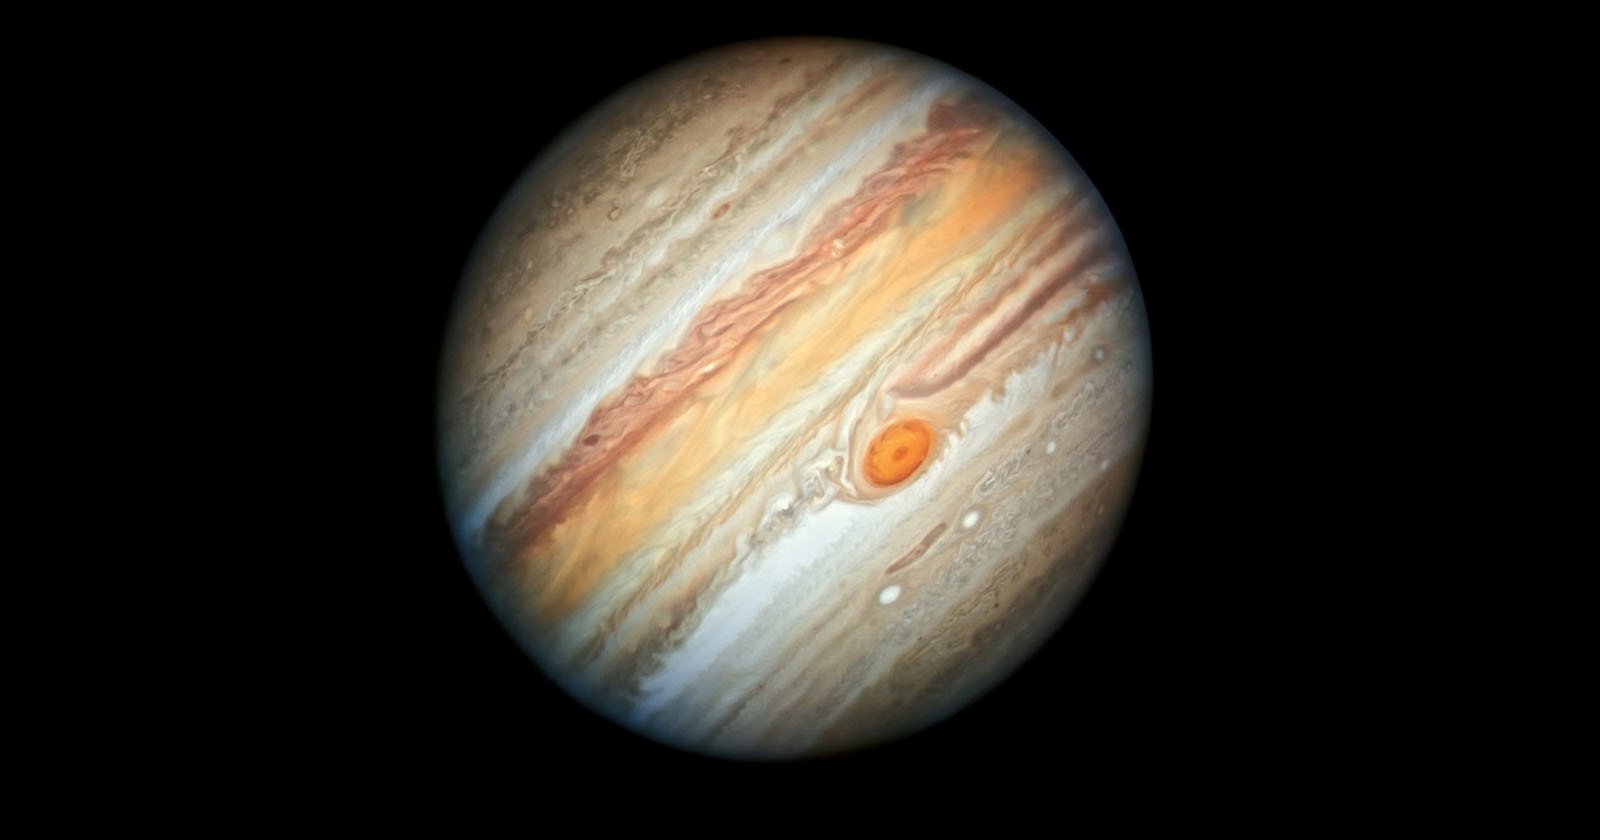 Next Week, Jupiter Will Be the Closest It Has Been to Earth in 59 Years